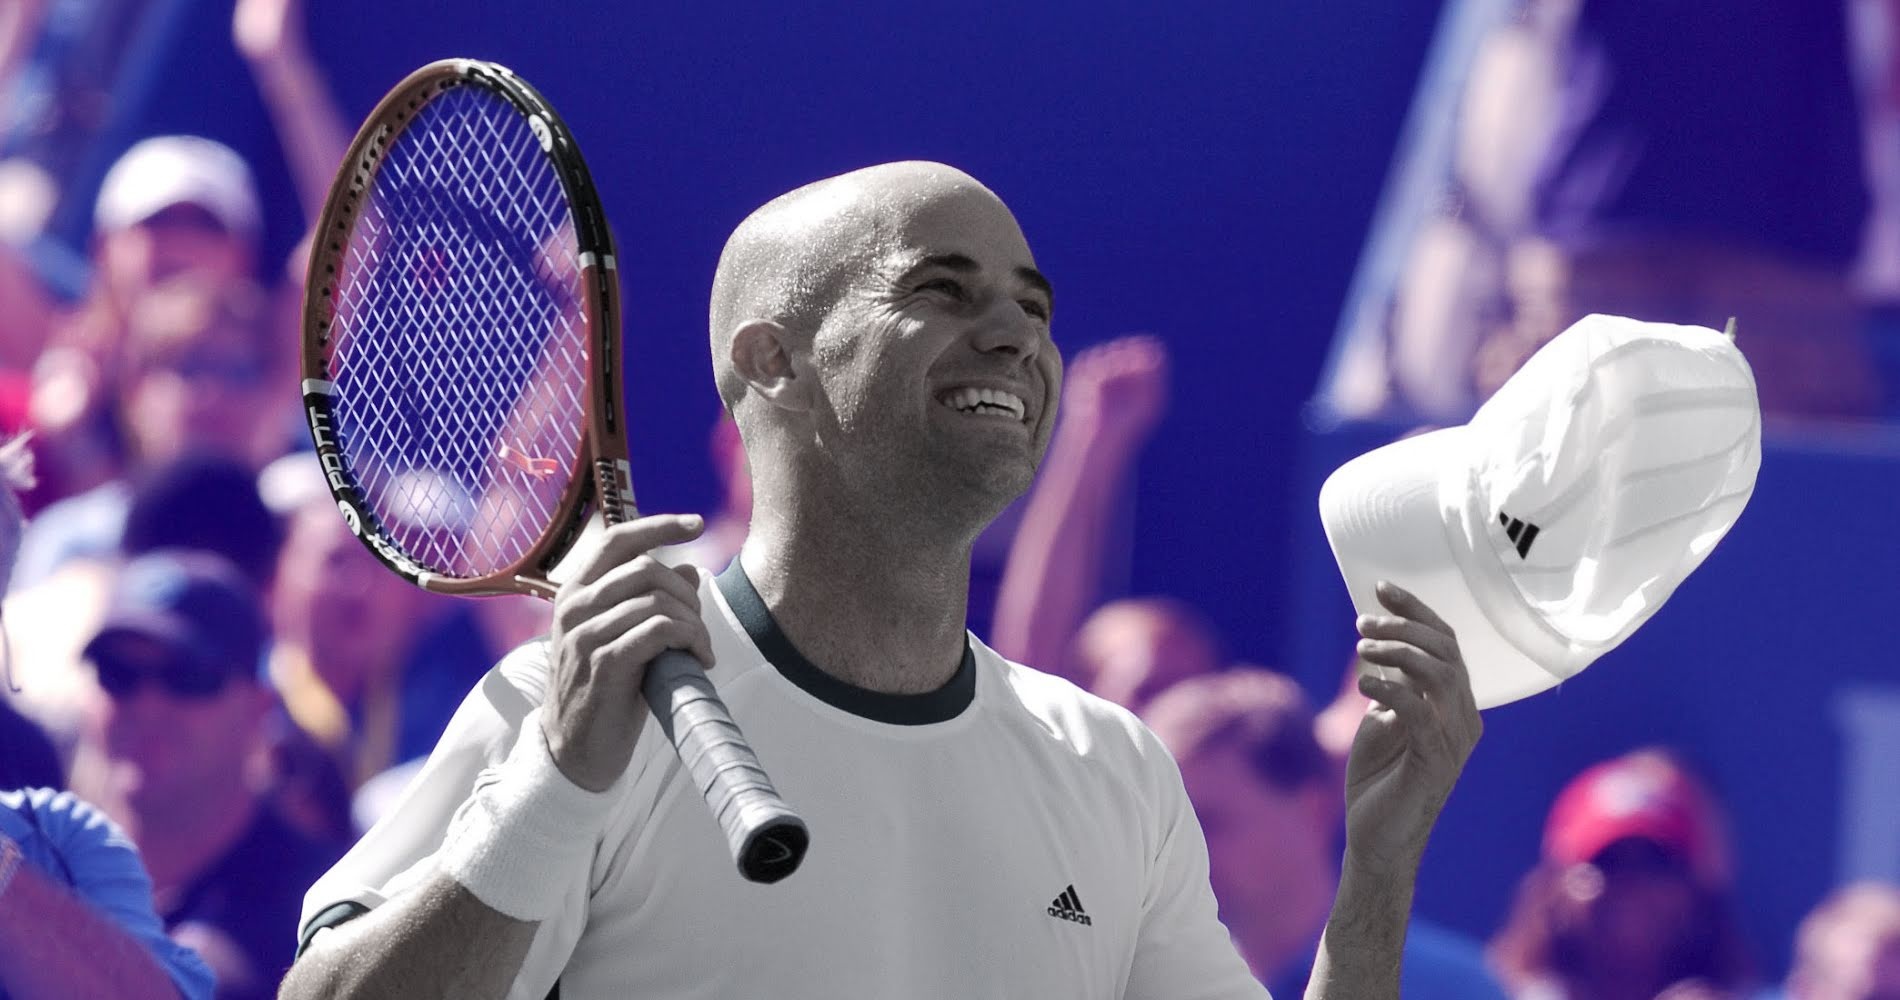 Andre Agassi, On this day 07/31